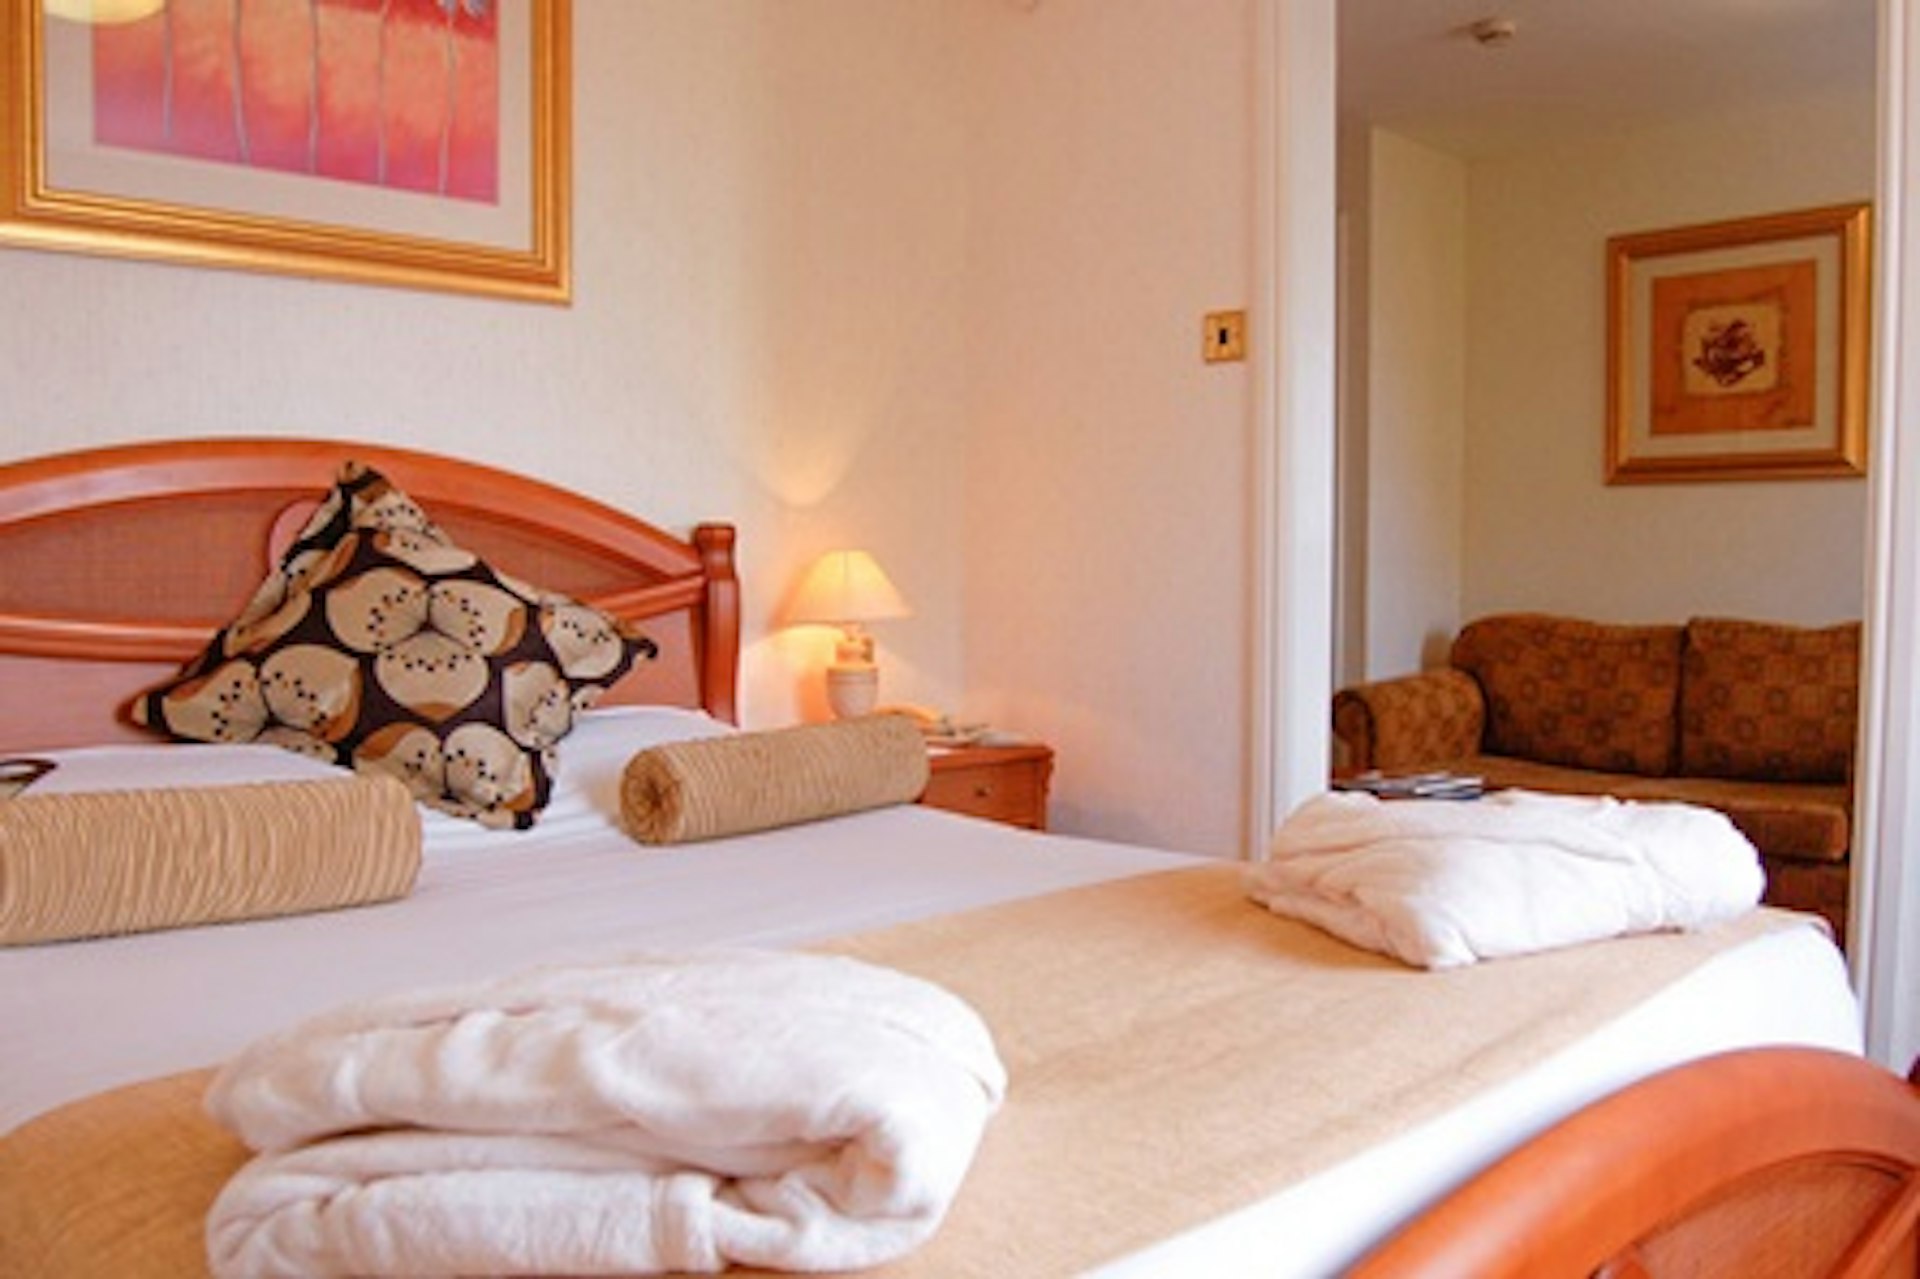 Two Night Soothing Spa Break with Dinner and Treatment for Two at Bannatyne Darlington Hotel 2